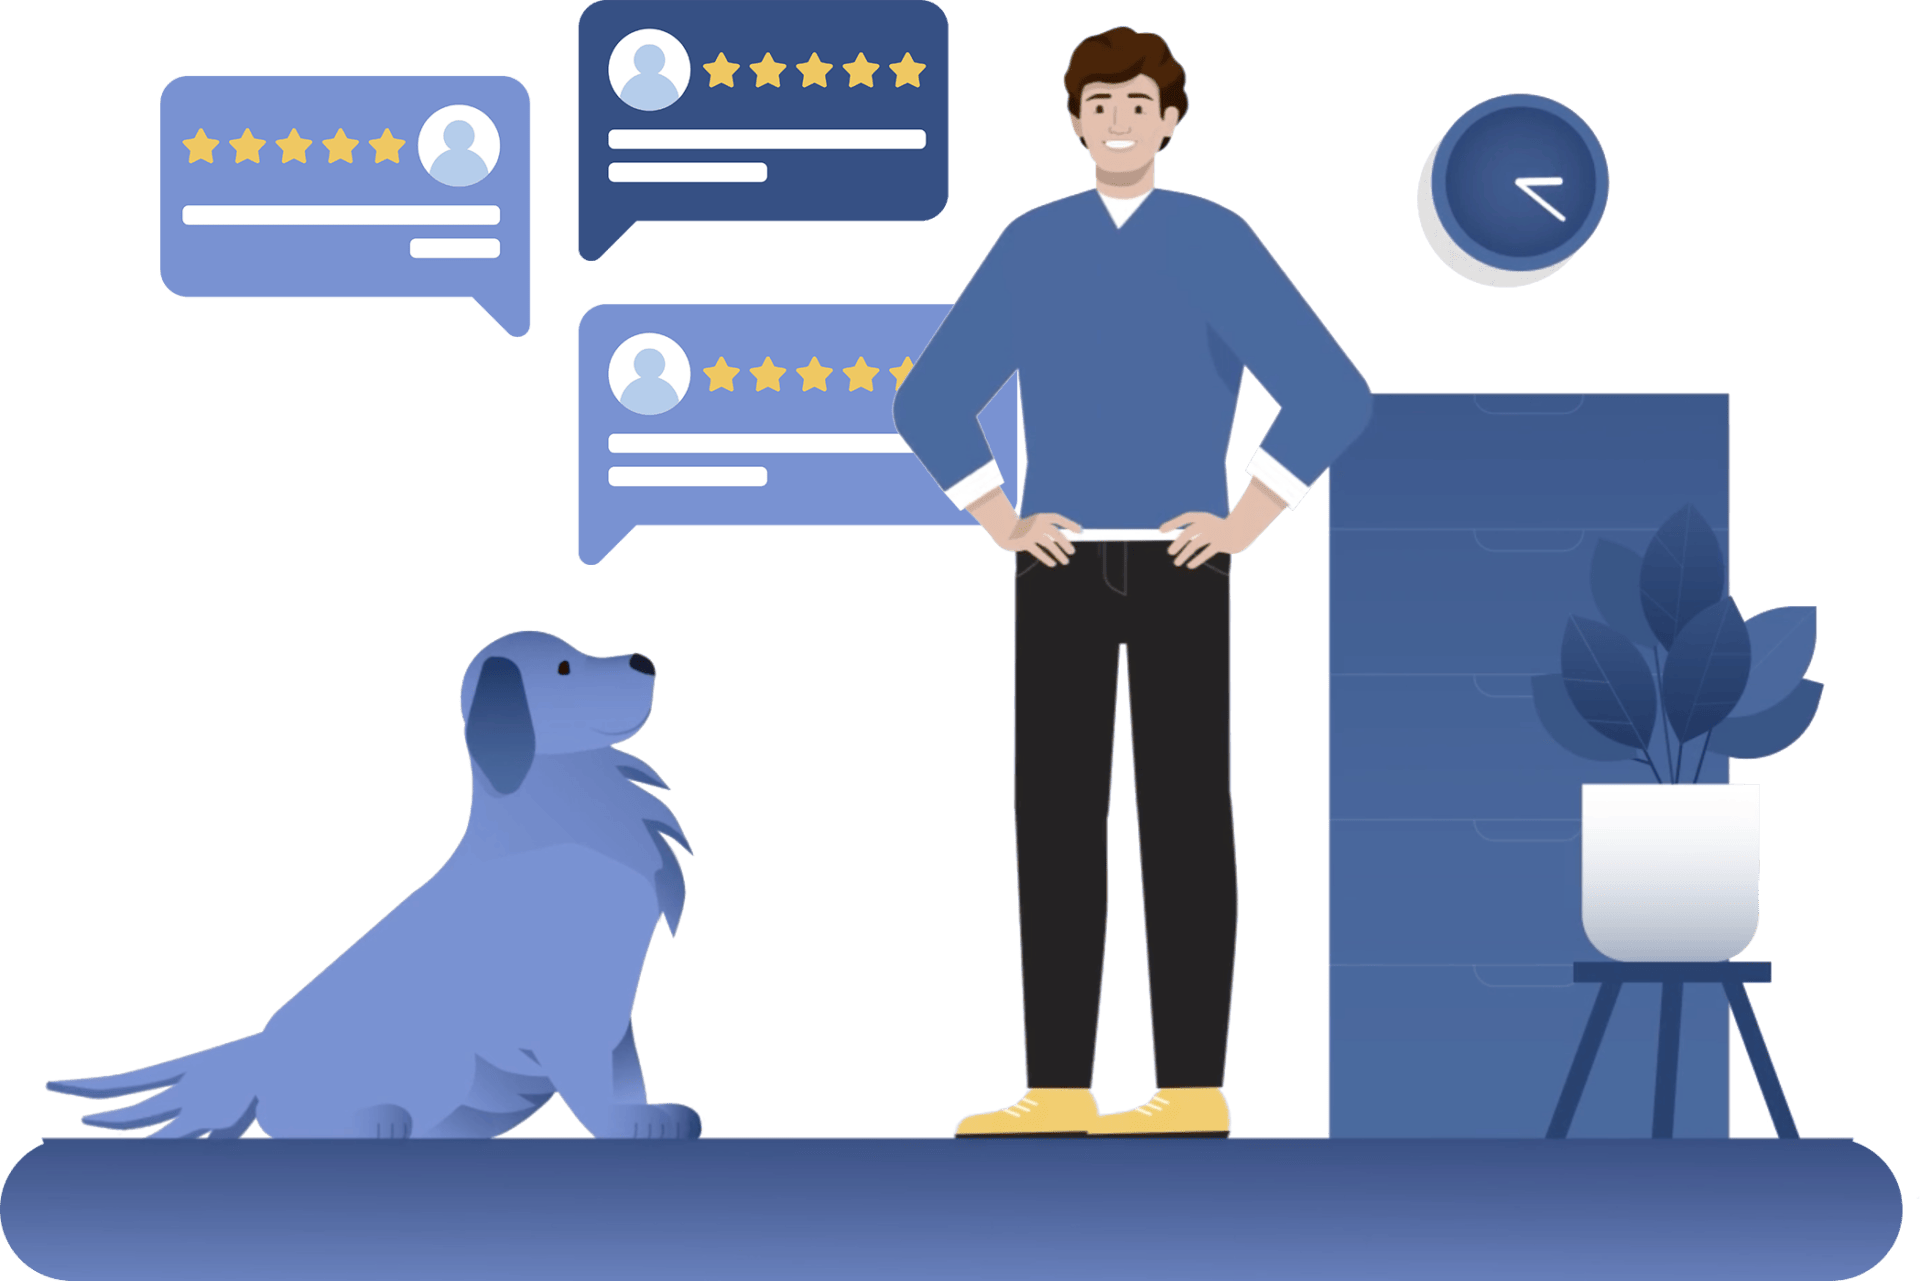 Illustration of a man and a dog with speech bubbles showing five-star reviews.